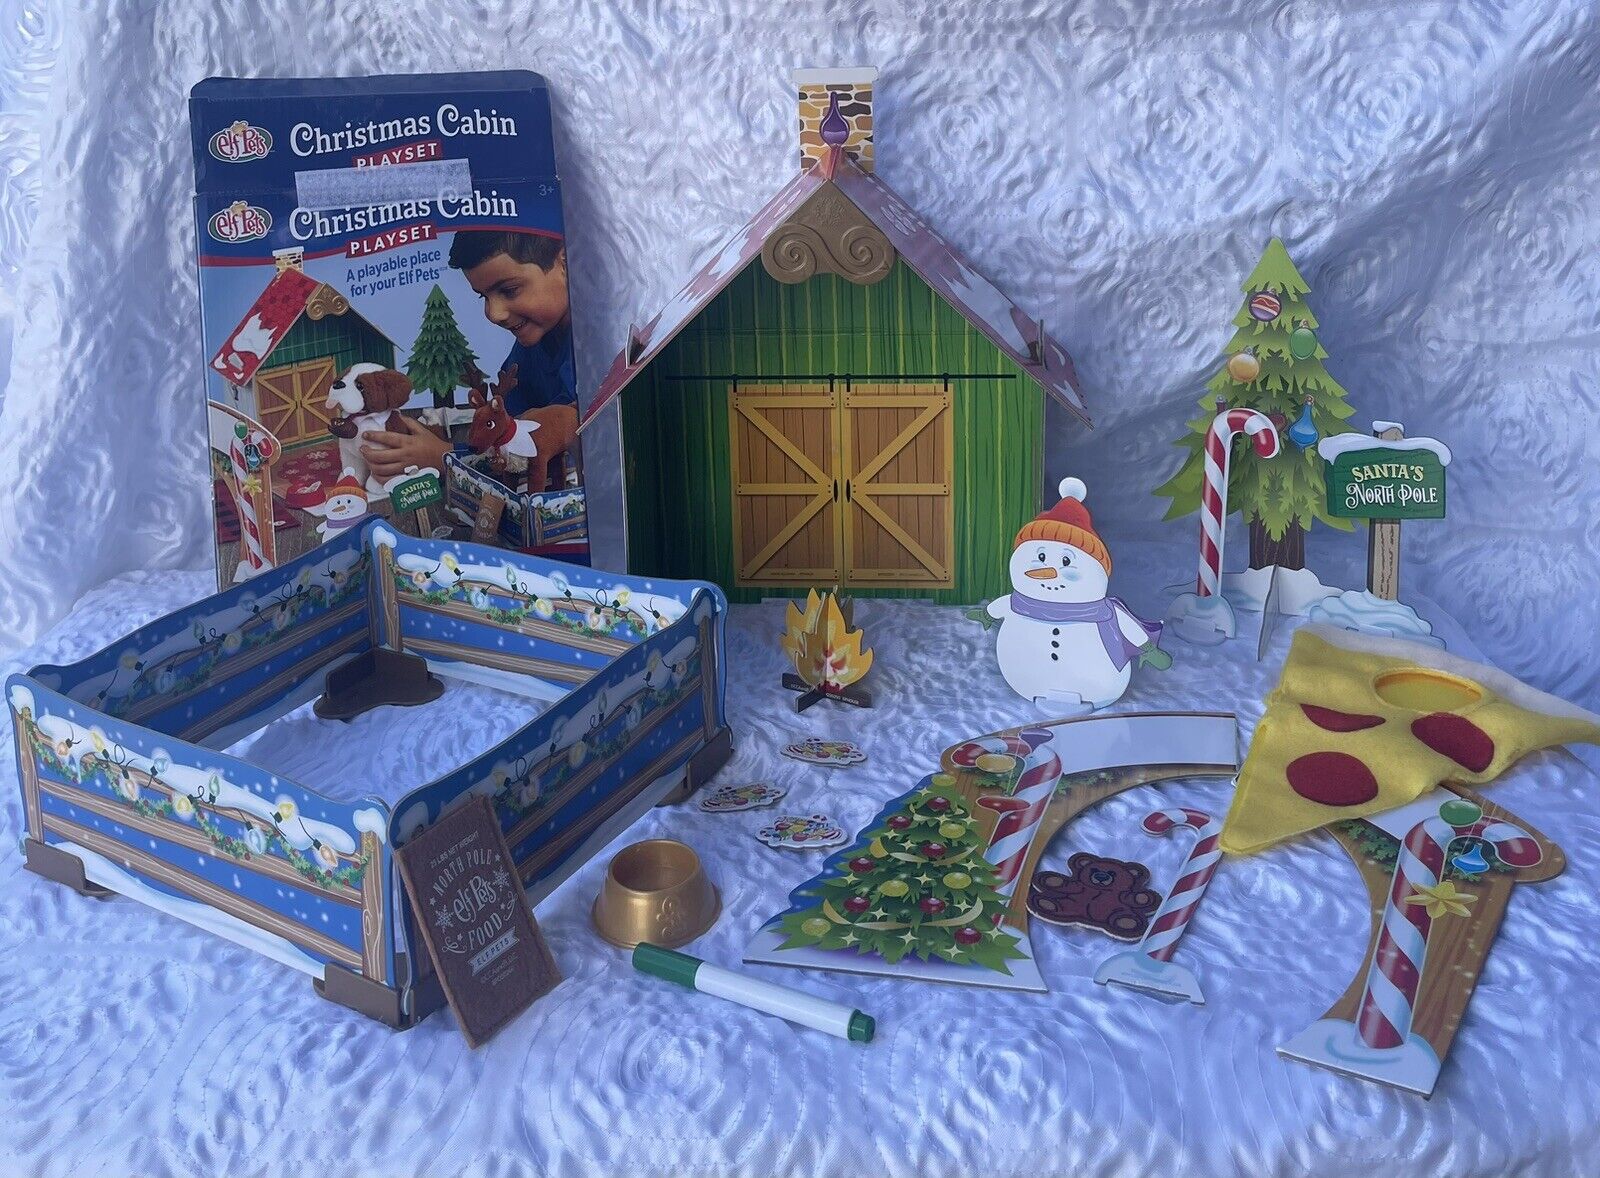 The Elf On The Shelf Clothing Elf Pets Christmas Cabin Playset Accessories Pizza